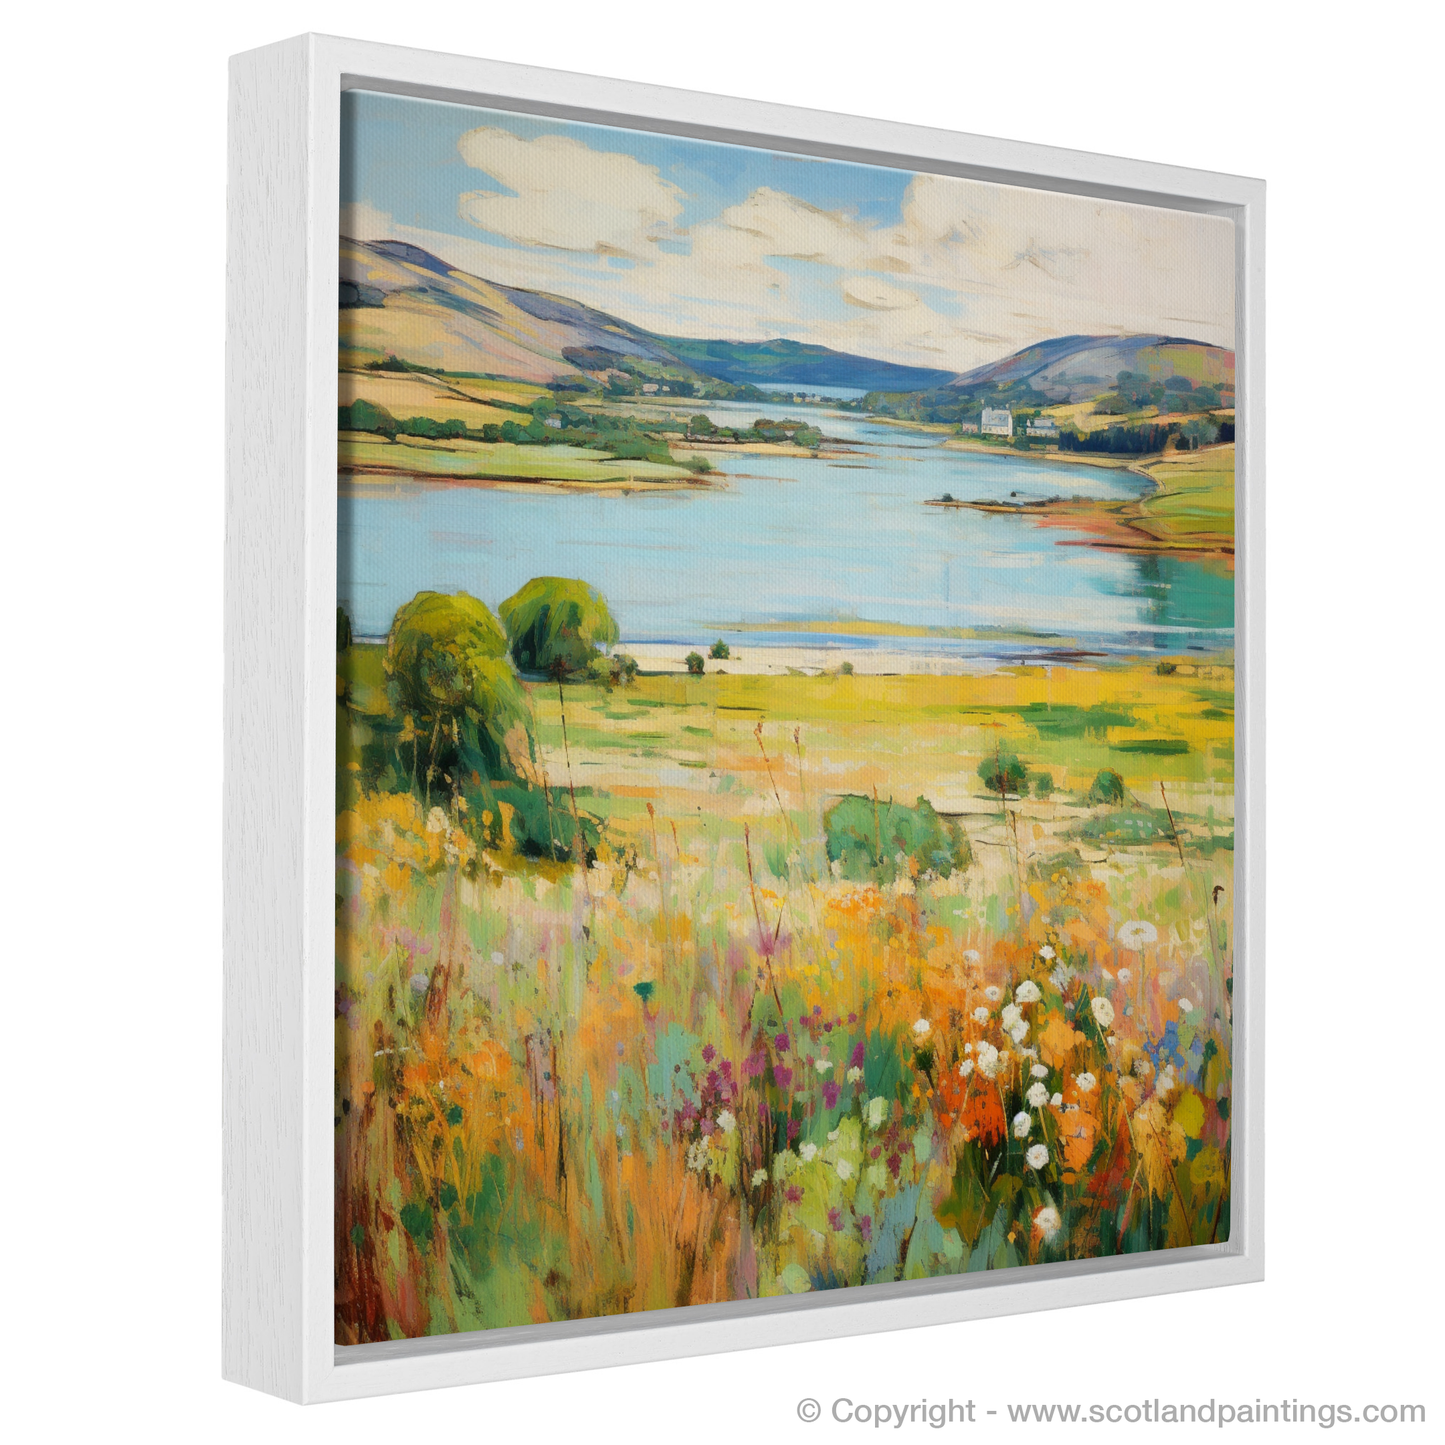 Painting and Art Print of Loch Leven, Perth and Kinross in summer entitled "Summer Serenity at Loch Leven".